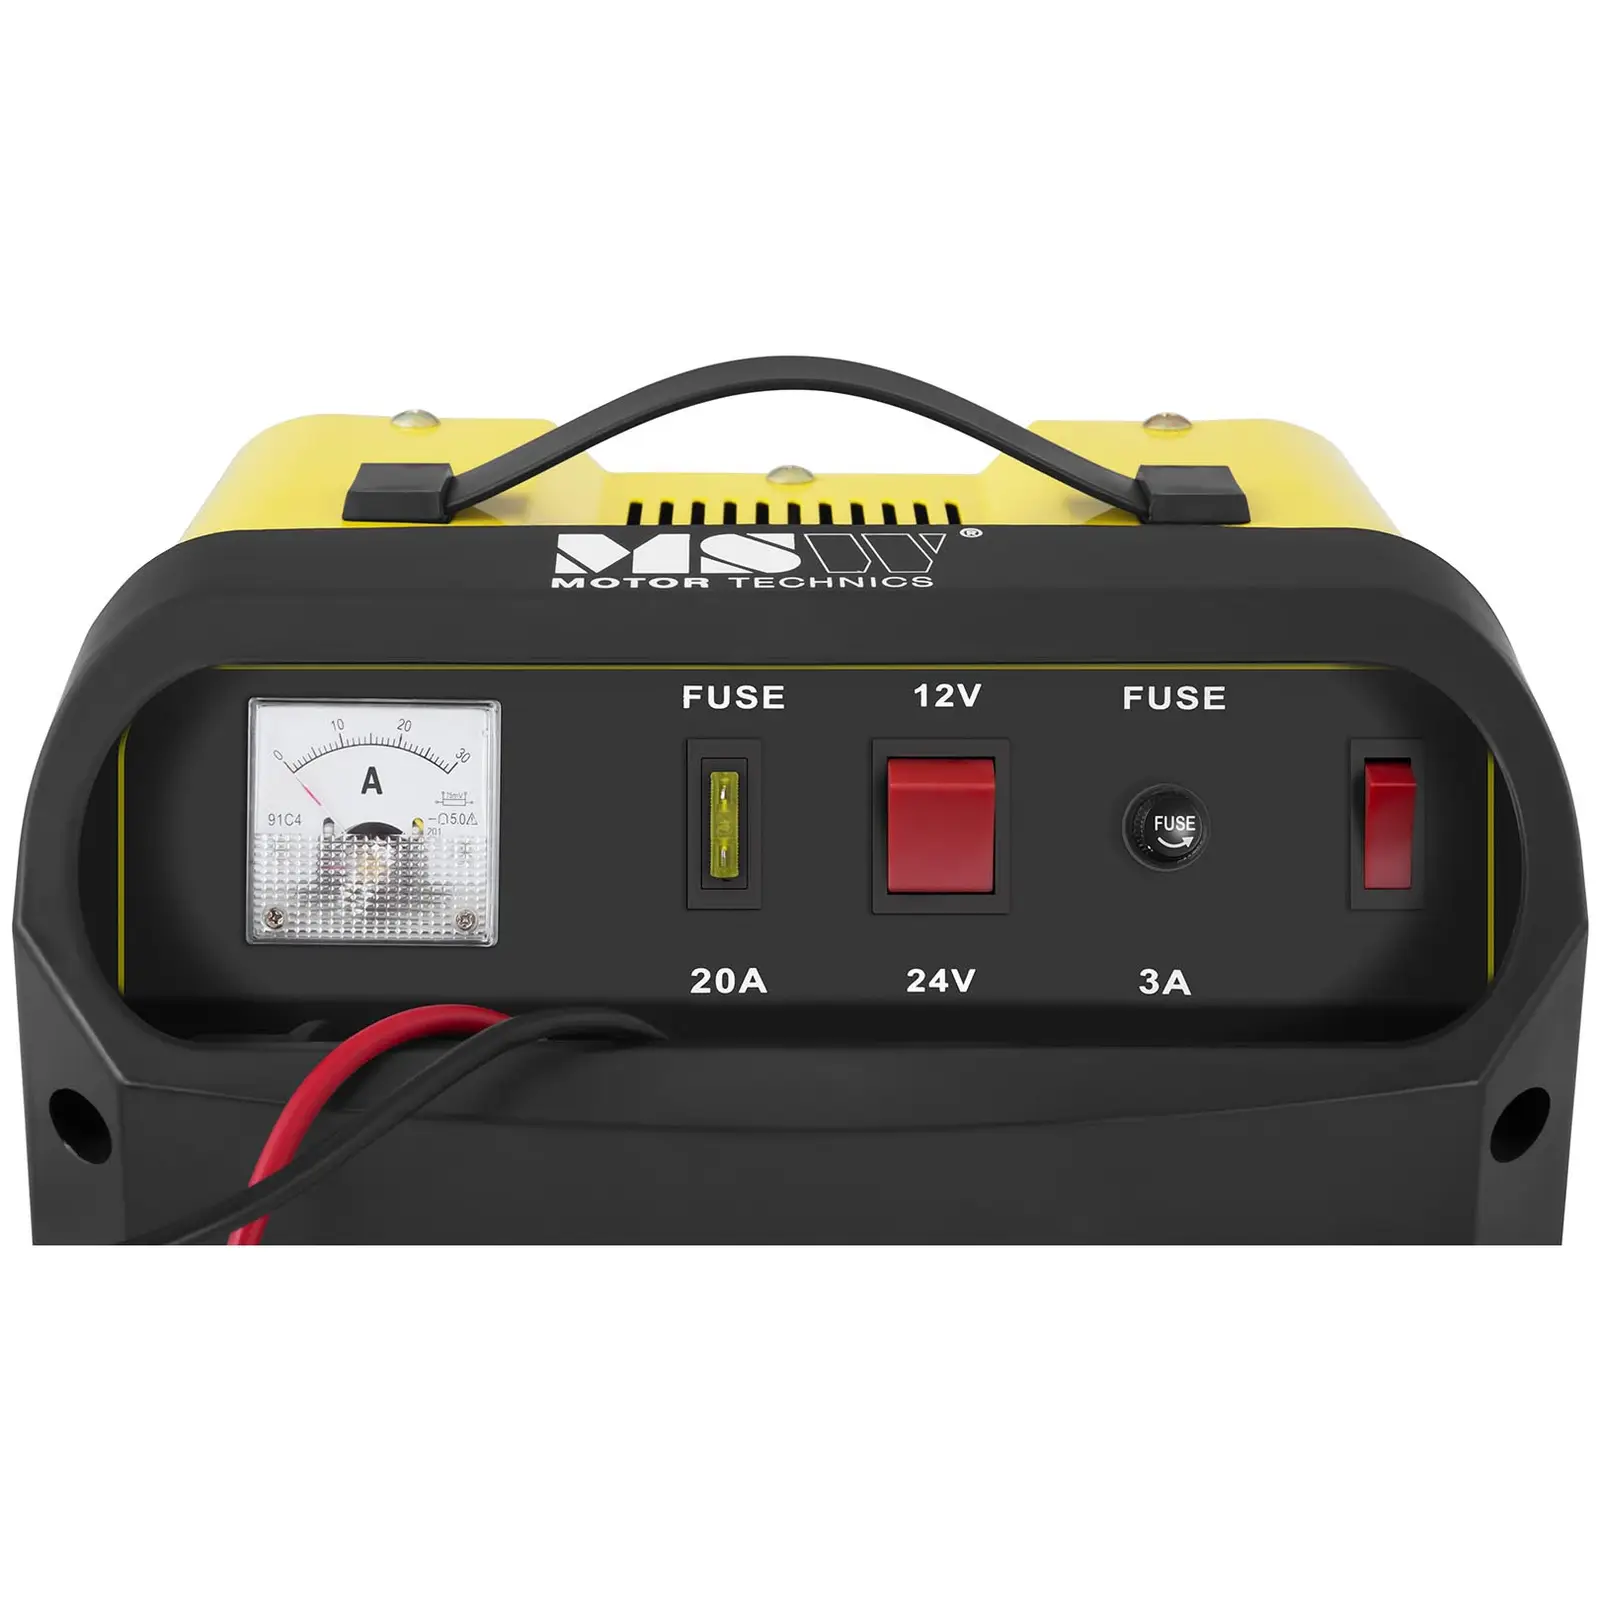 Heavy Duty Battery Charger - 12/24 V - 8/12 A - Diagonal Control Panel